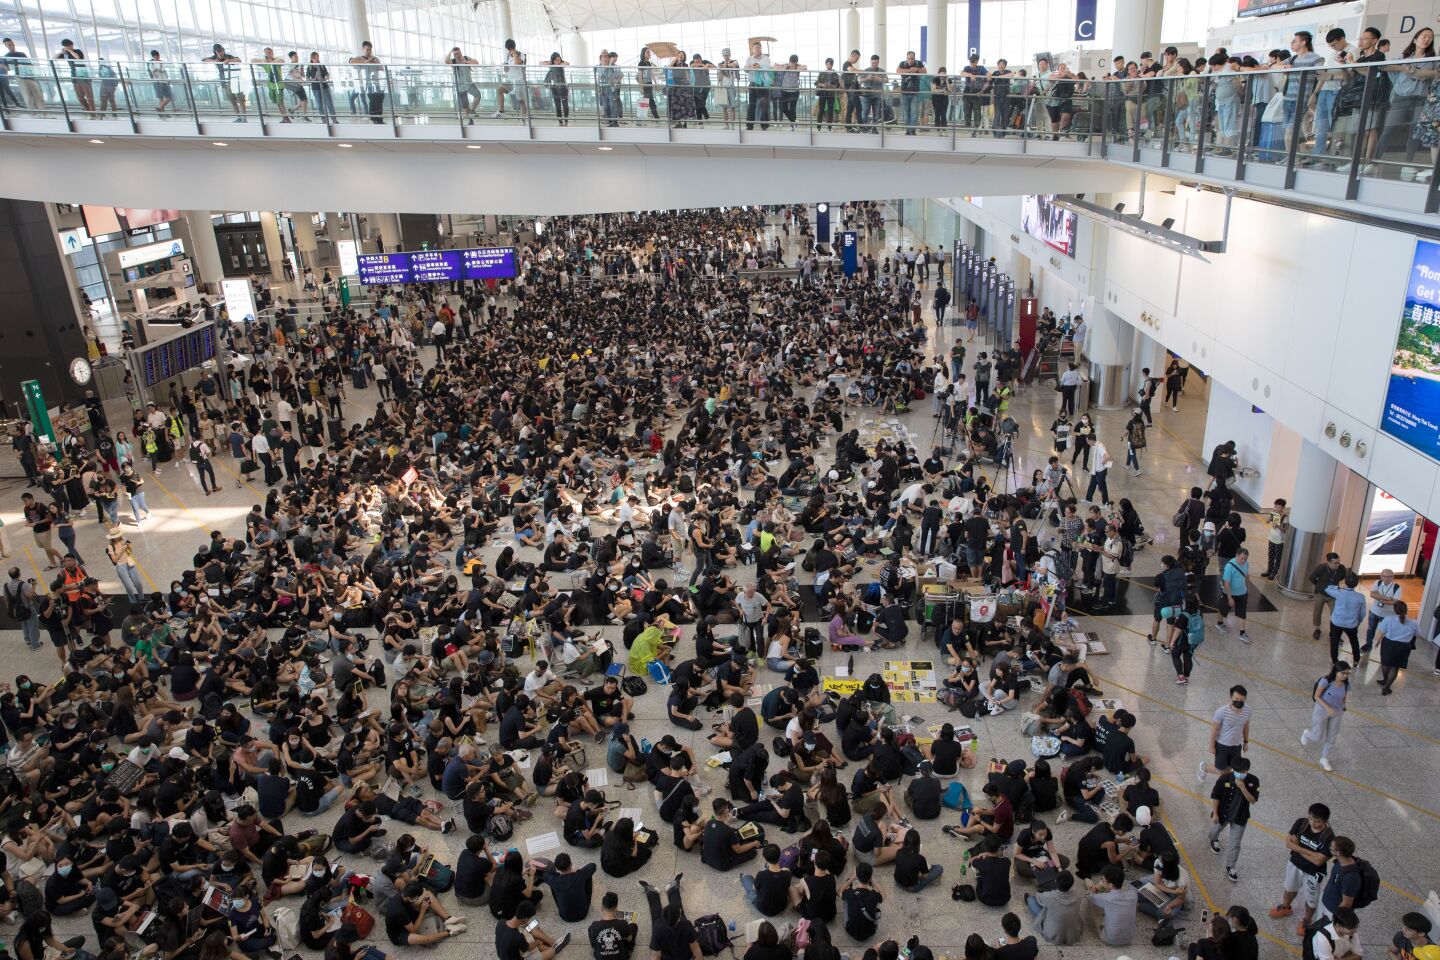 Mandatory Credit: Photo by JEROME FAVRE/EPA-EFE/REX (10358133f) Protesters rally inside the arrivals hall of Hong Kong International Airport in Hong Kong, China, 09 August 2019. Protesters were gathering at the airport for a three-day sit-in to protest against a now-suspended extradition bill and call for universal suffrage, and to raise awareness among international visitors to Hong Kong of claims of police brutality. Anti-government protesters rally in Hong Kong airport, China - 09 Aug 2019 ** Usable by LA, CT and MoD ONLY **